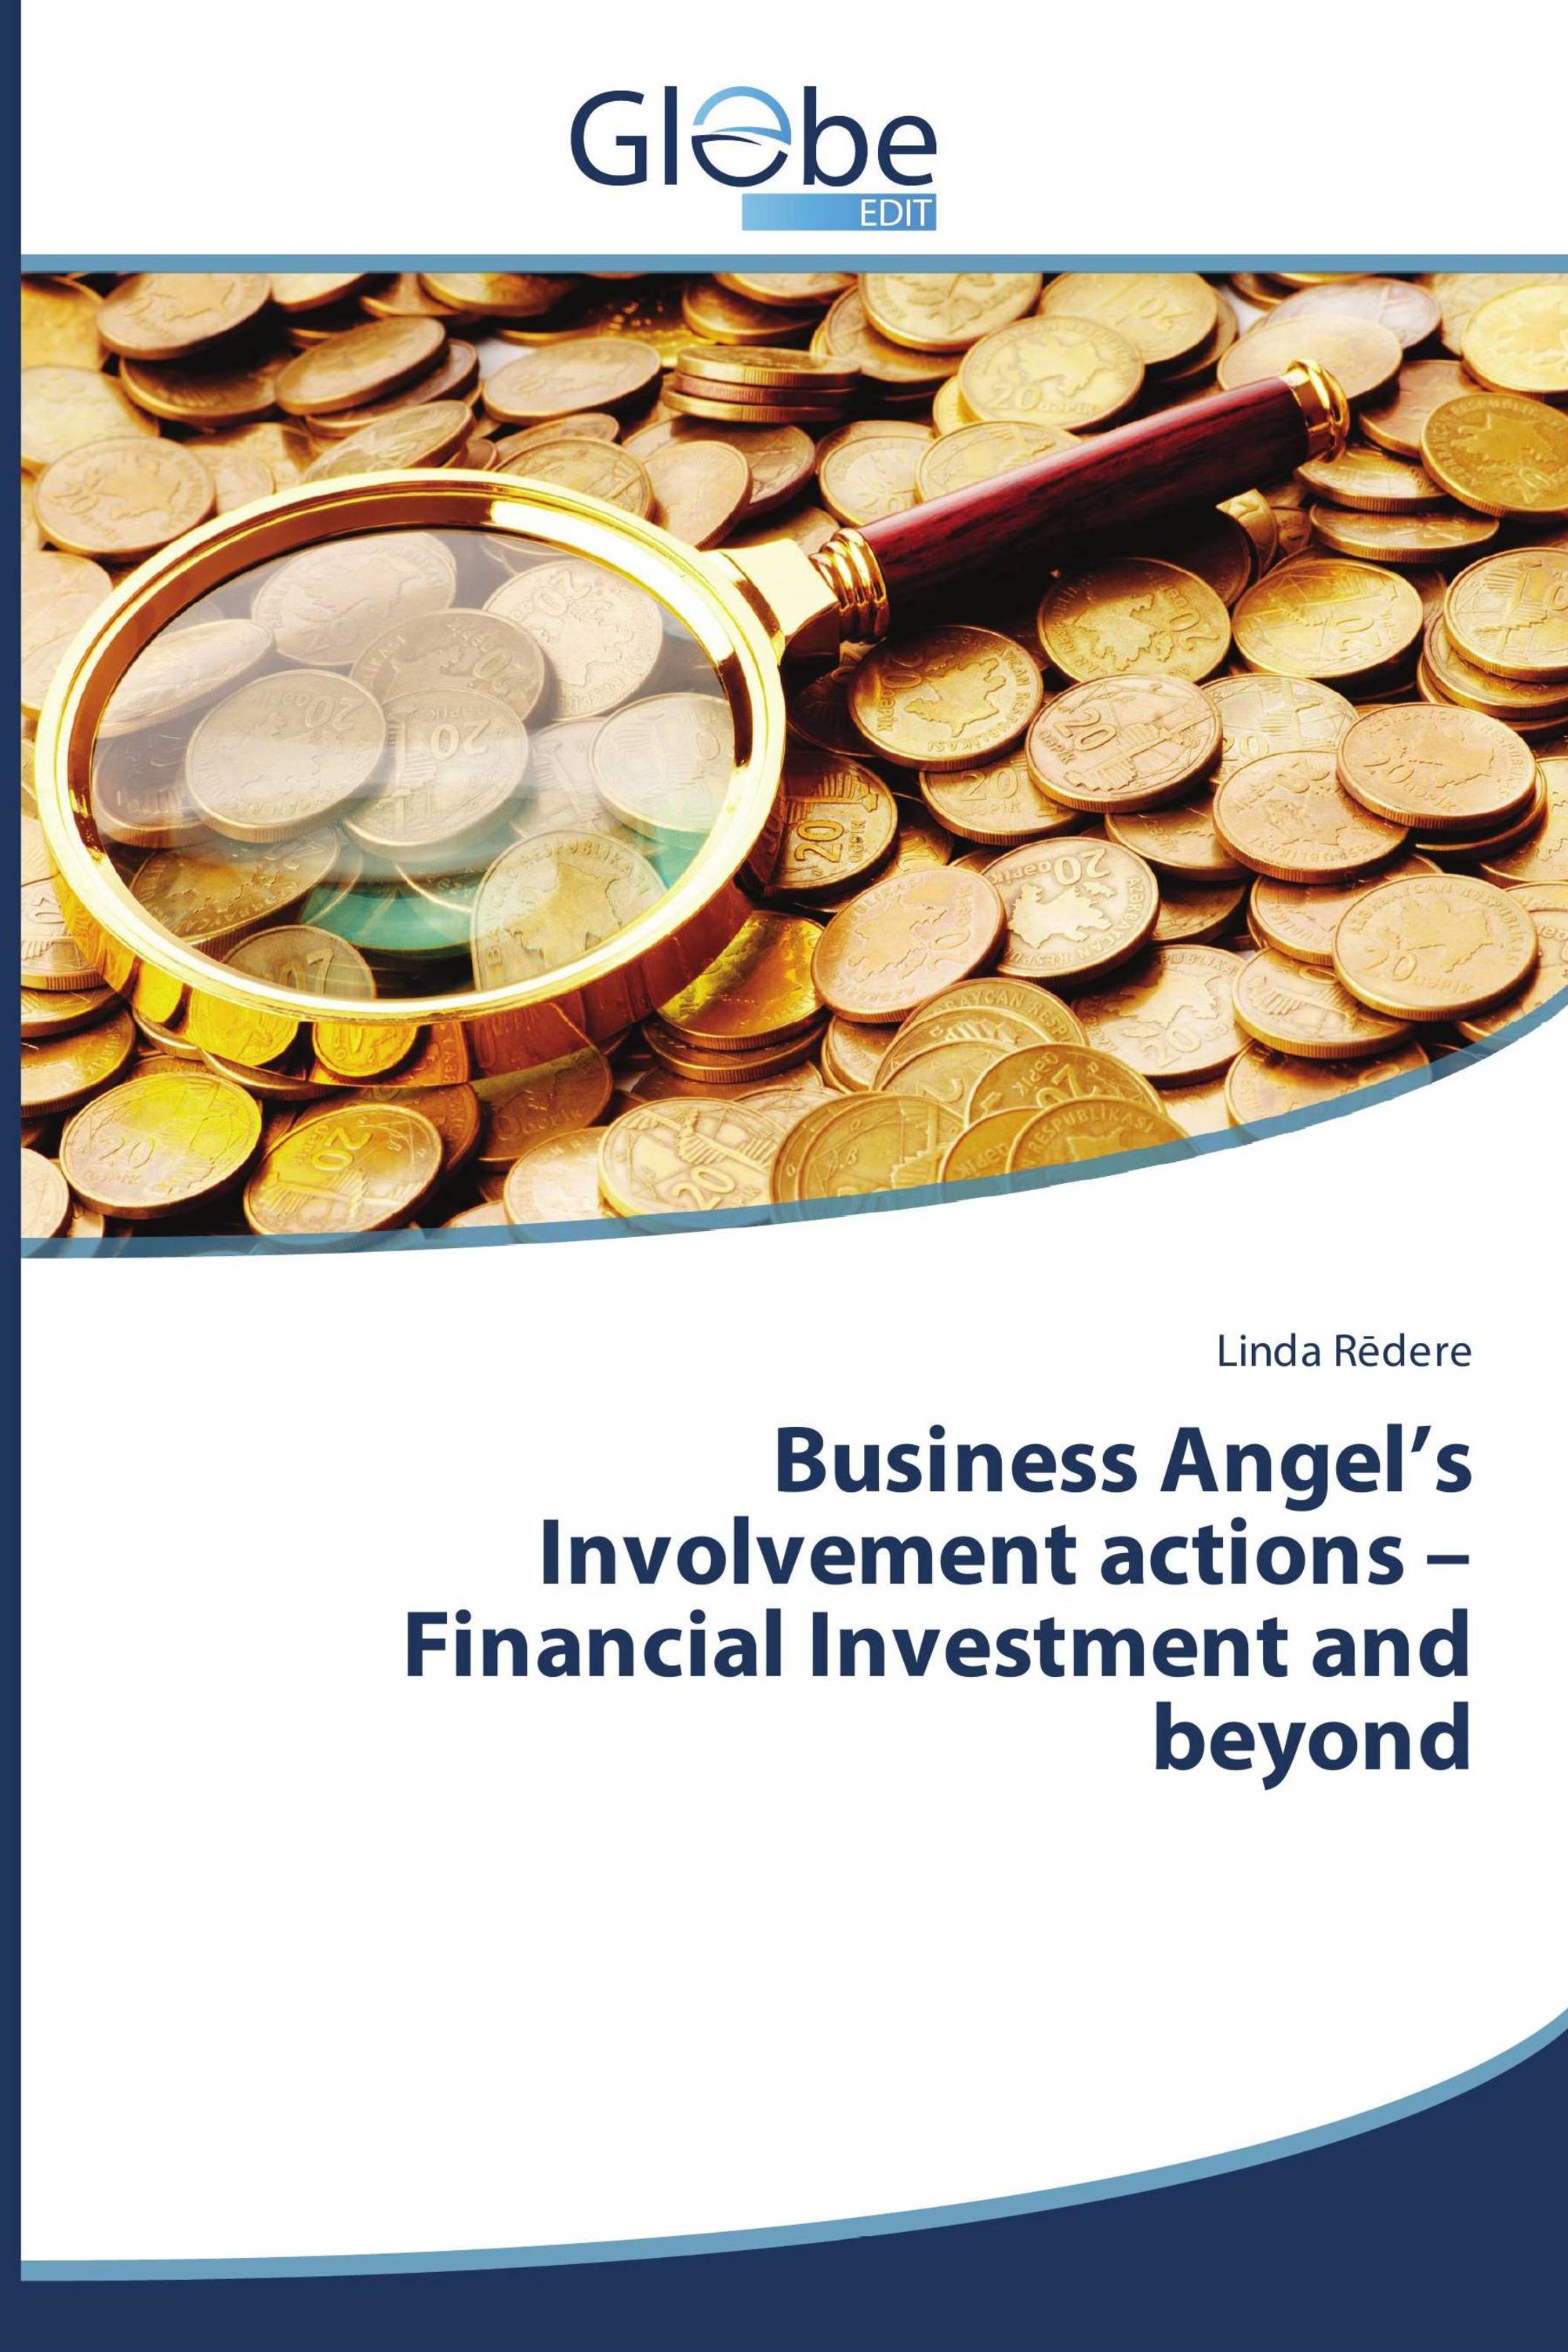 Business Angel’s Involvement actions – Financial Investment and beyond